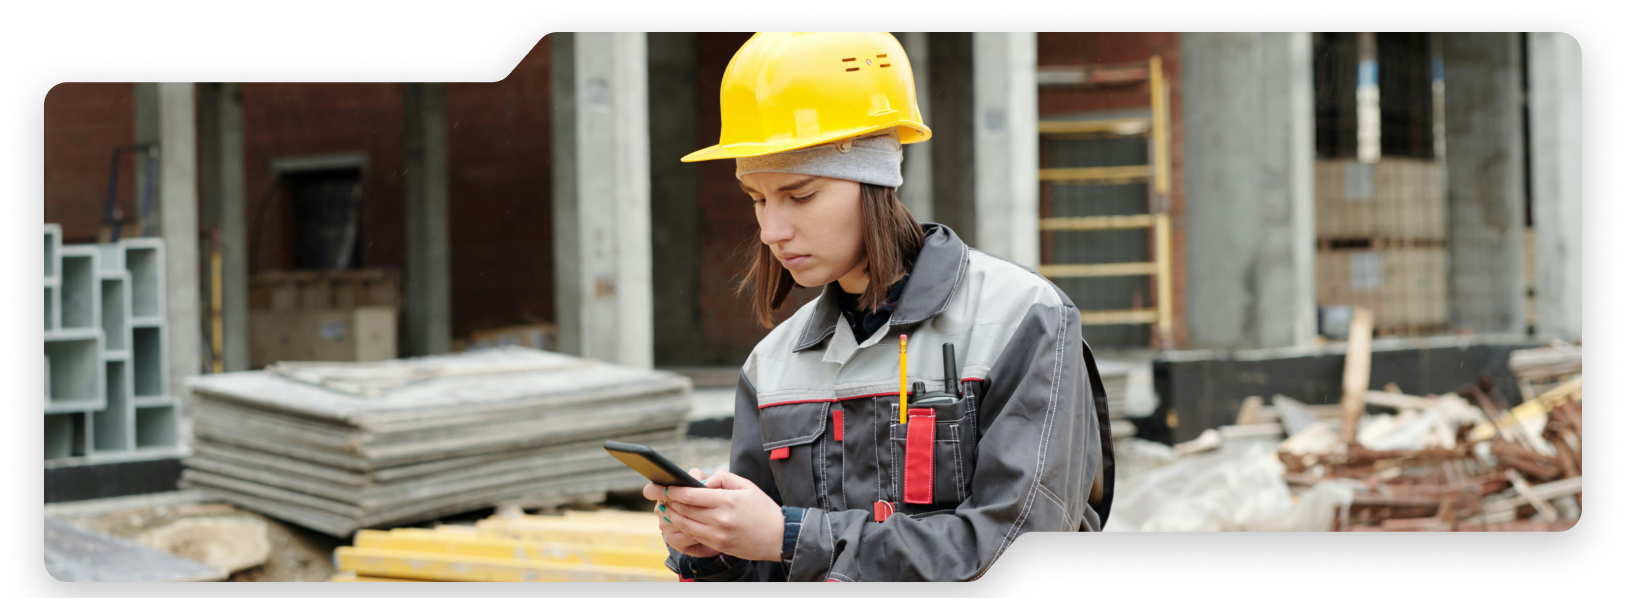 Woman at a construction site using Unite's Single Number Reach service.